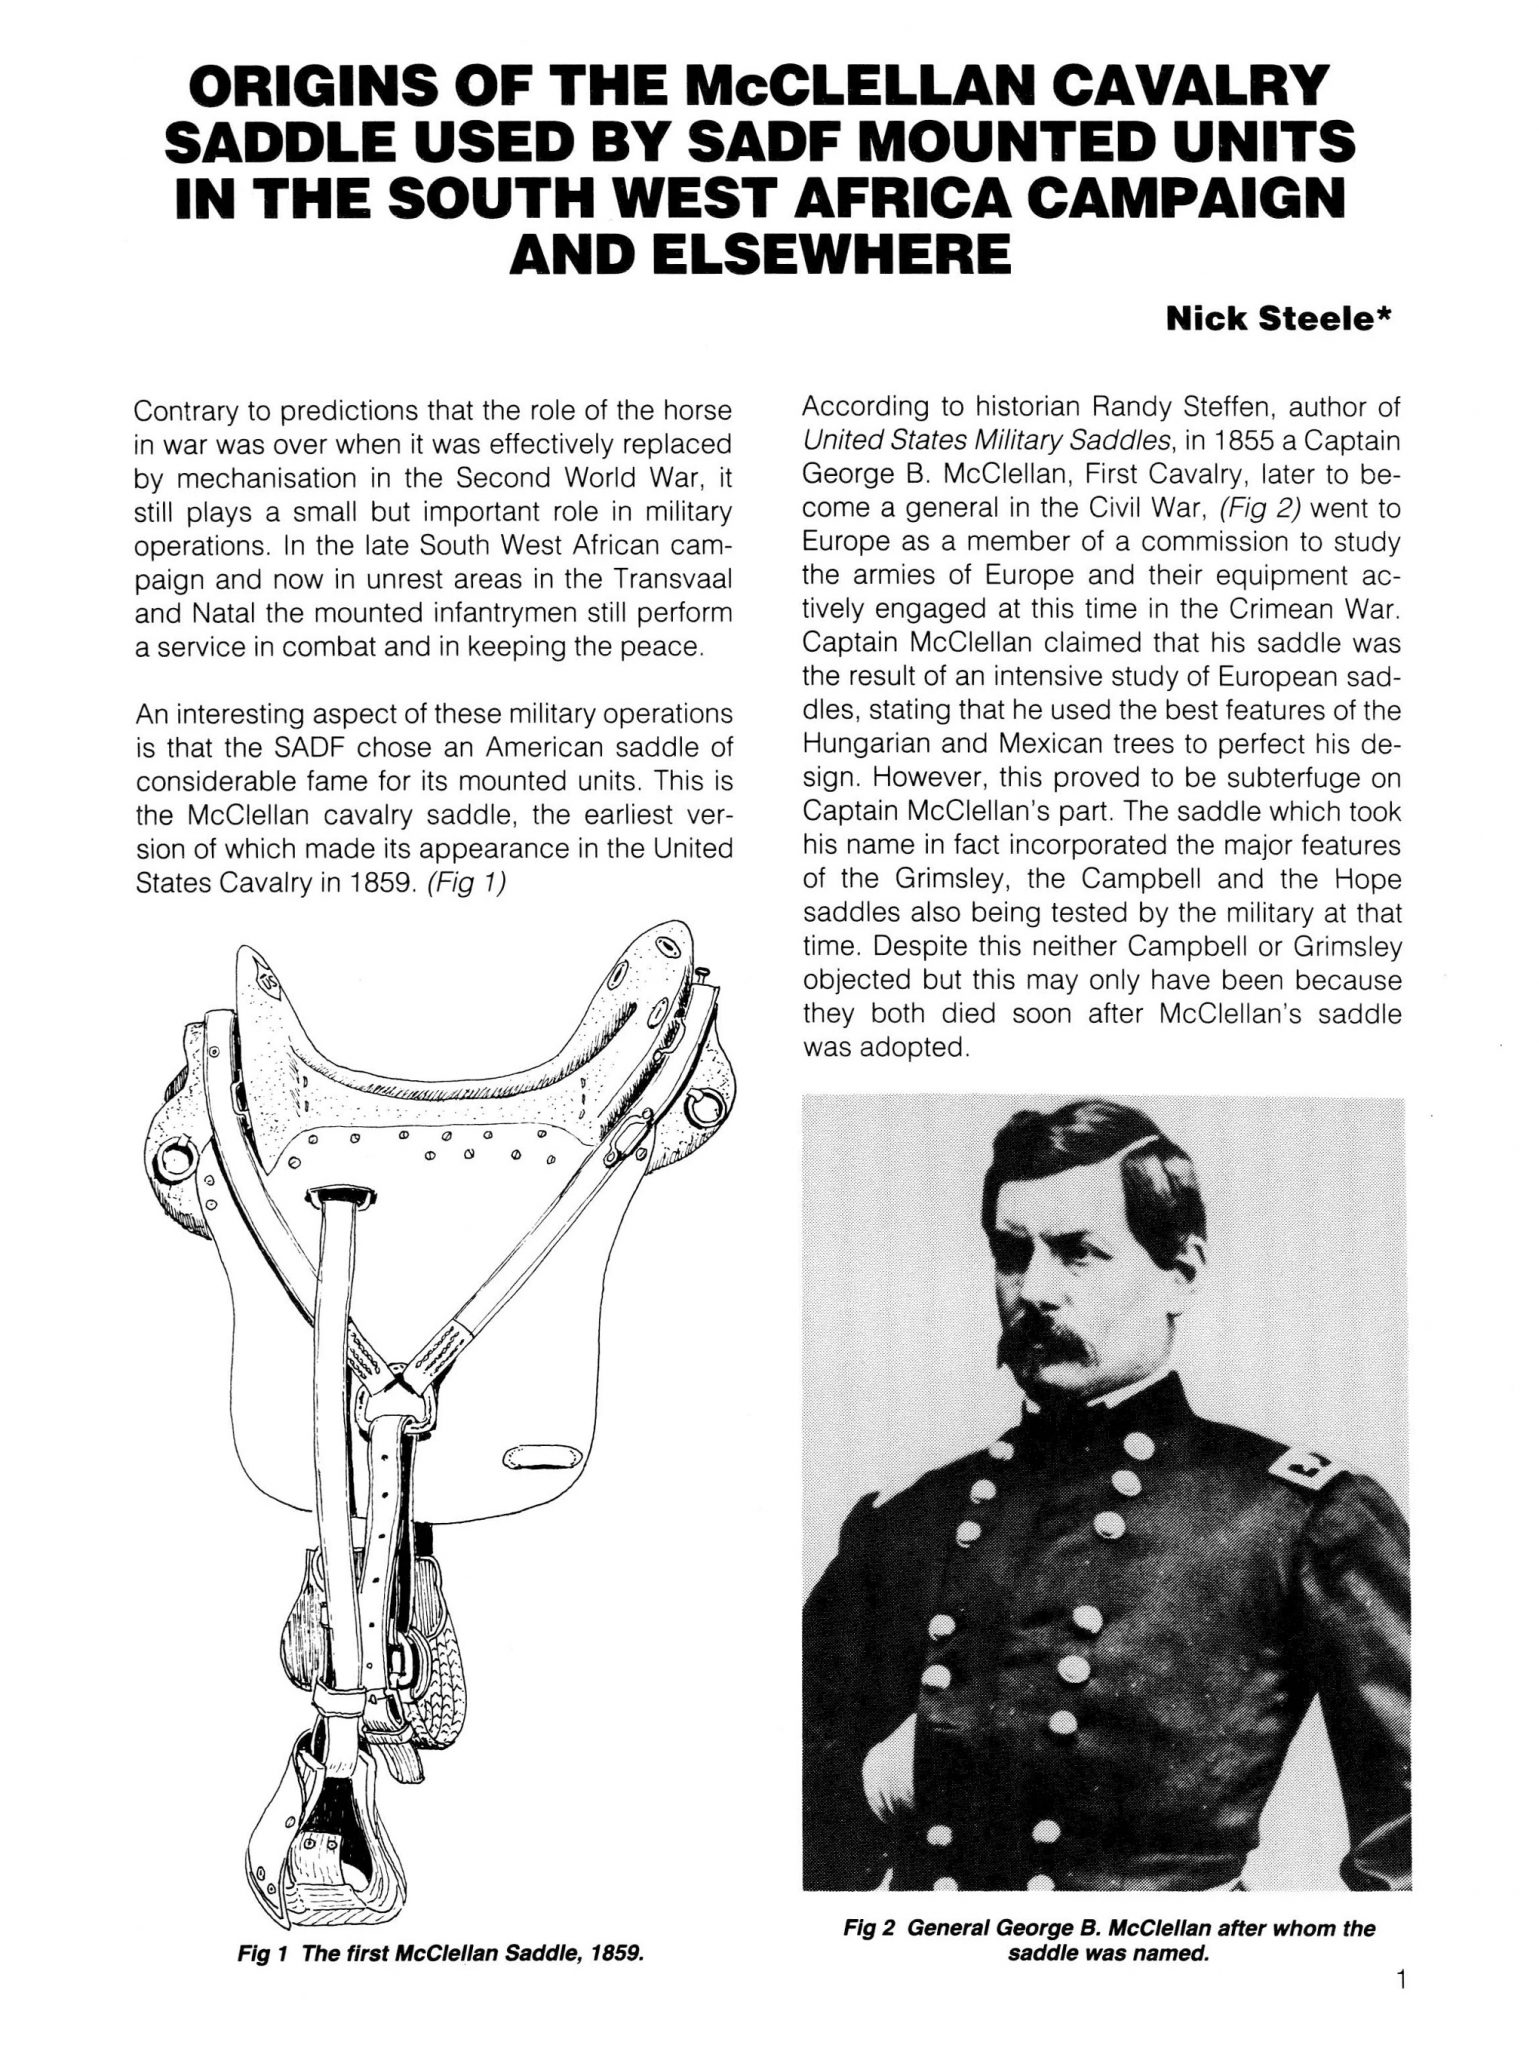 Page one of a brief historical document concerning the origins of the McClennan cavalry saddle and includes a side-view line drawing of the first McClellan Saddle and a photo of General George B McClellan after whom the saddle was named.